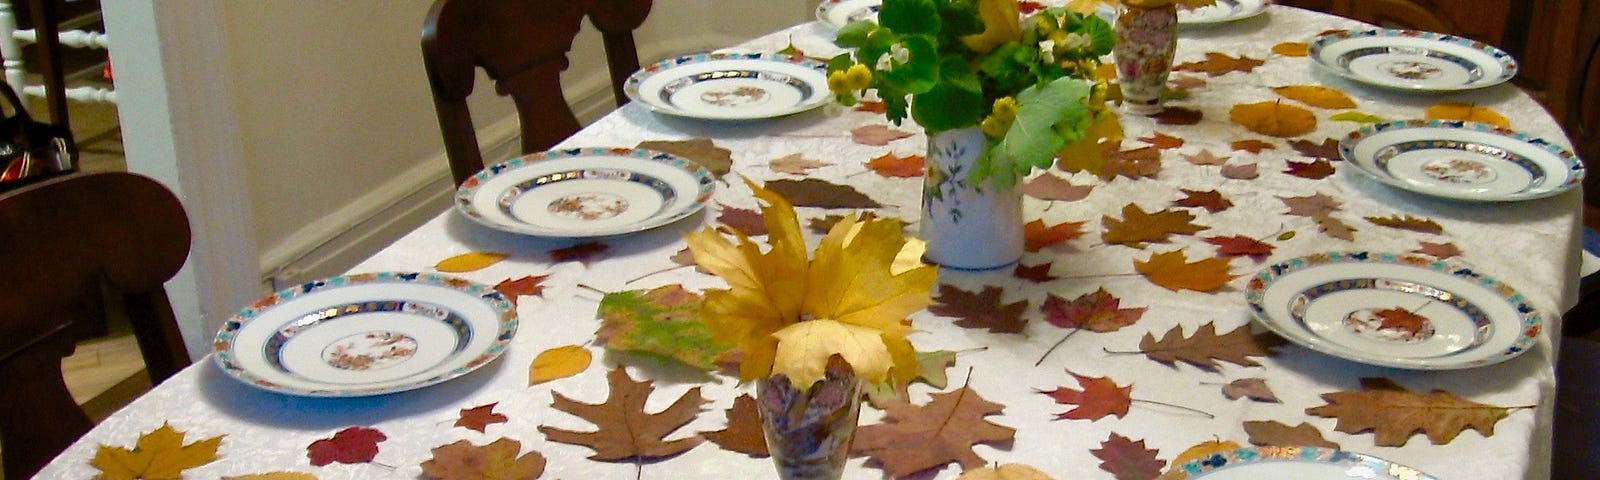 The Thanksgiving table.